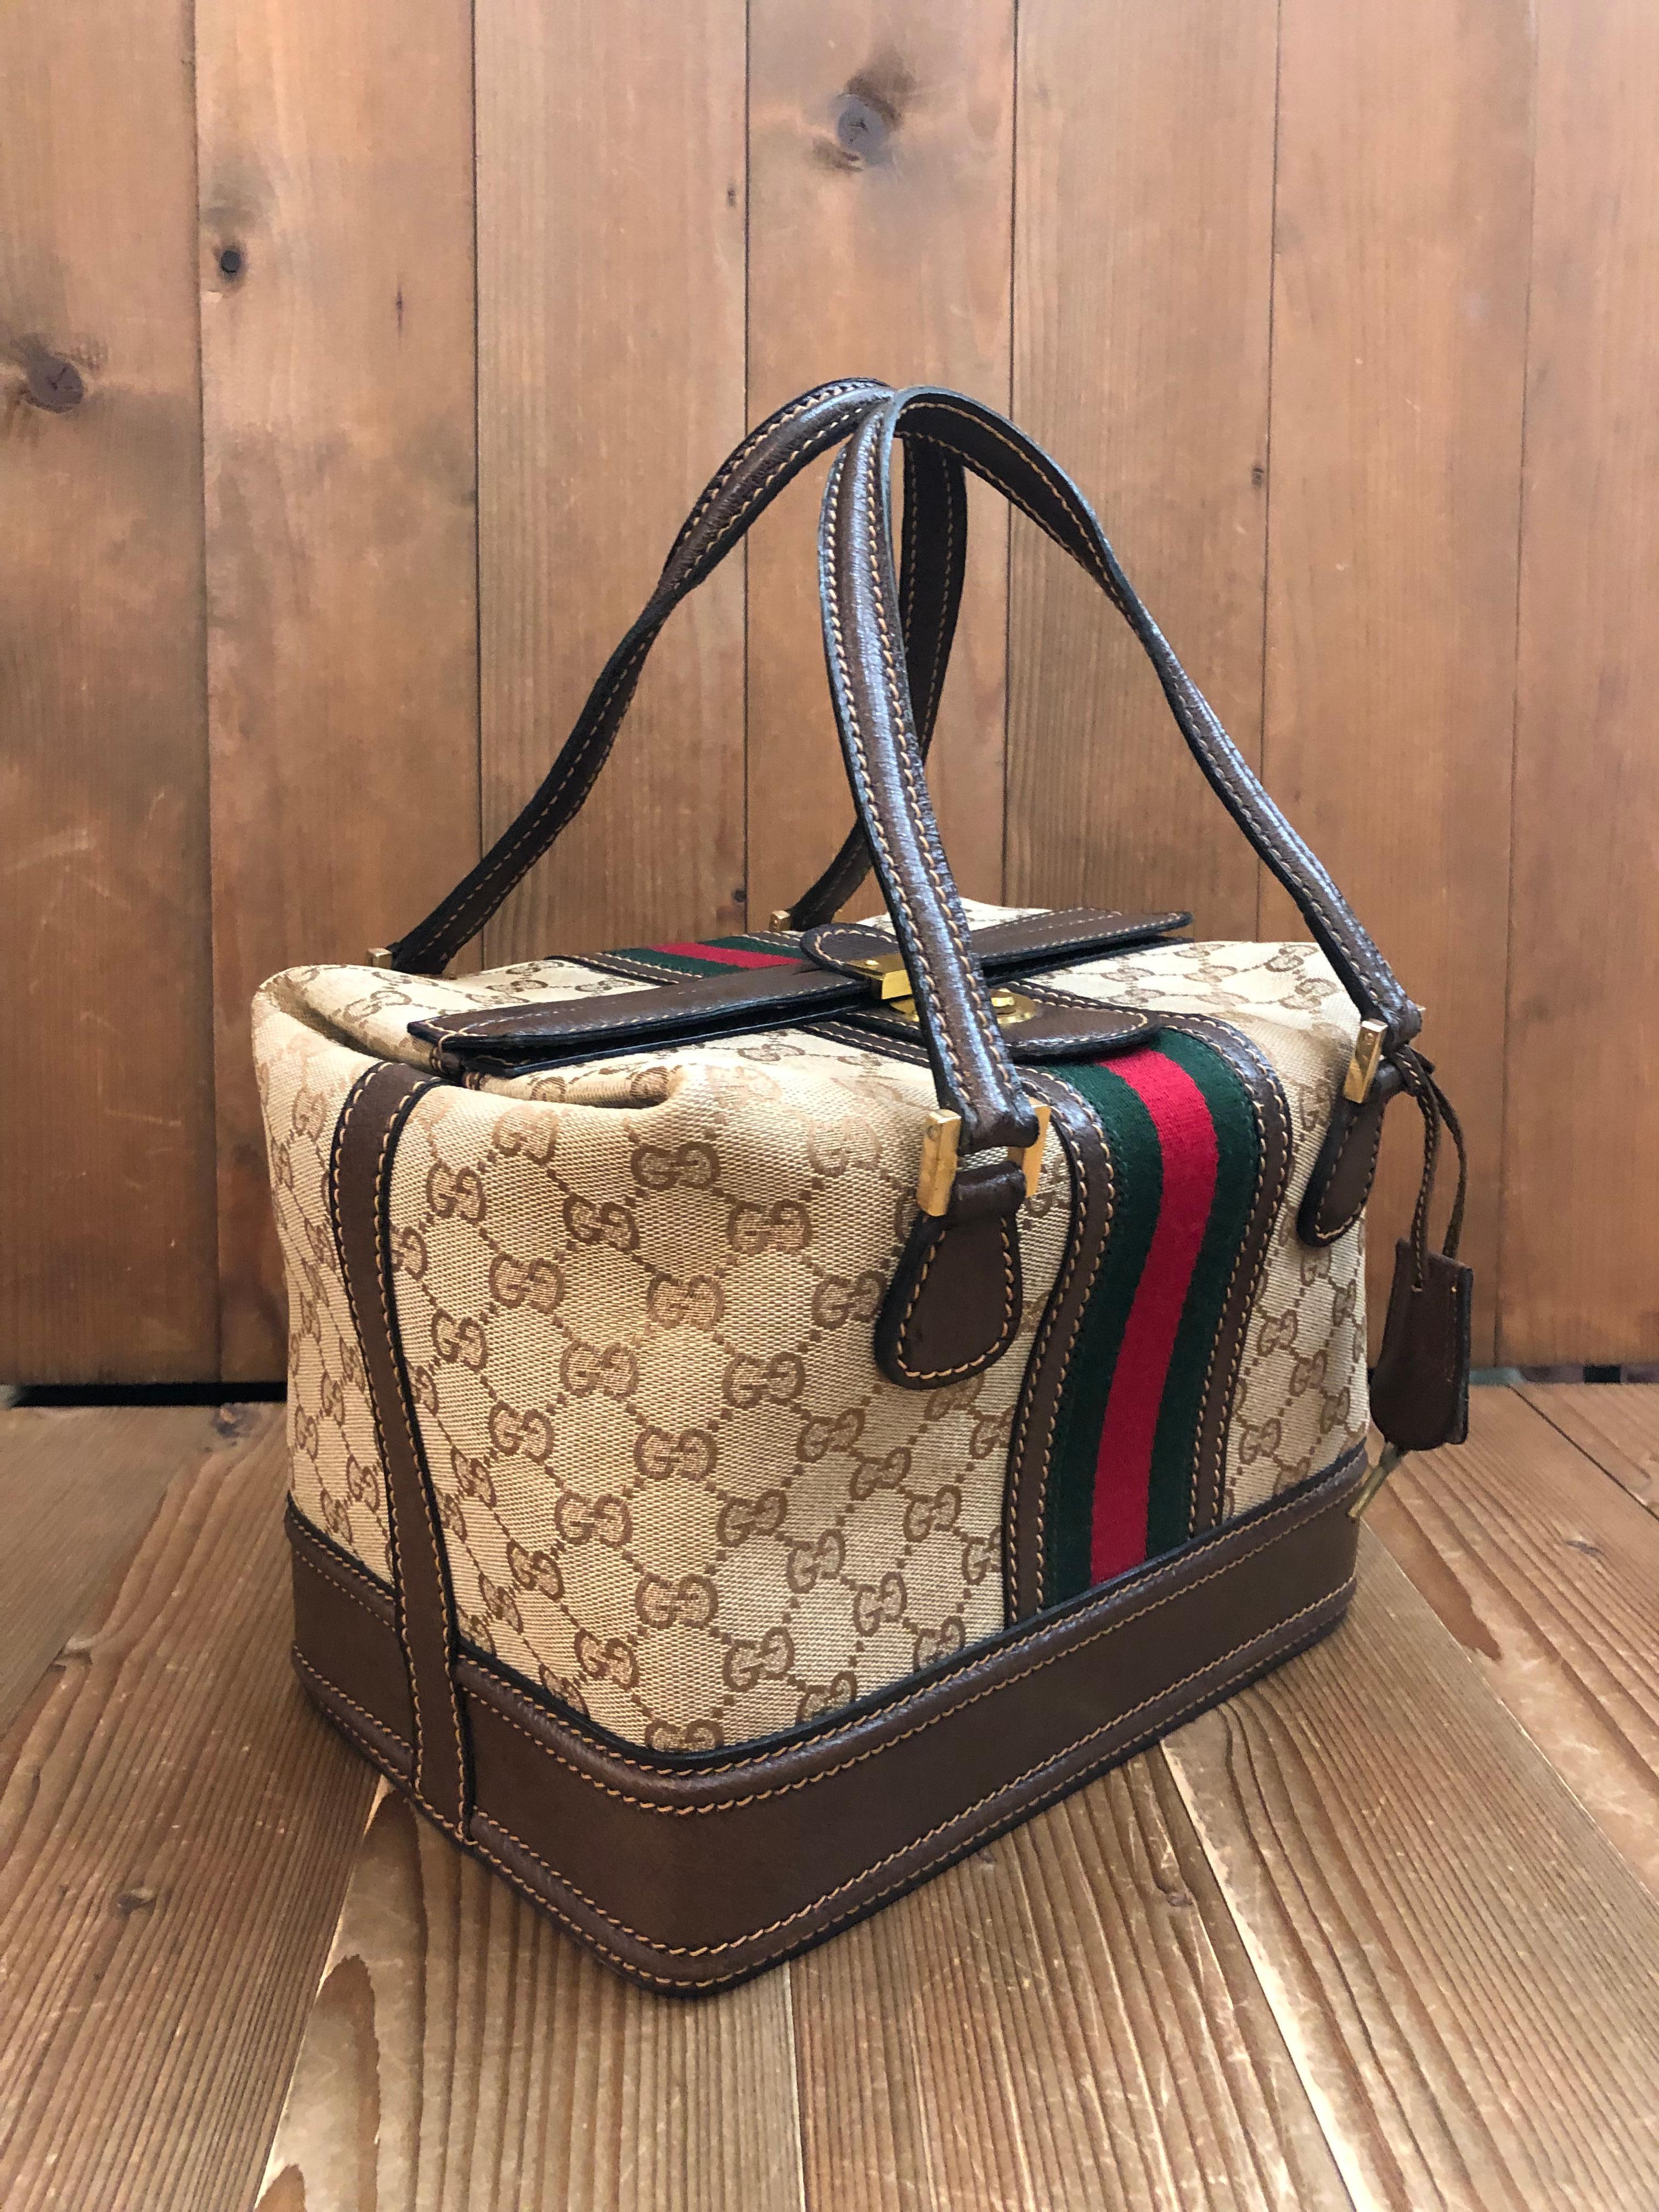 This small vintage GUCCI Web vanity trunk bag is crafted of brown GG monogram jacquard and pigskin leather in dark brown decorated with Gucci’s iconic red/green stripe. Top push lock opens to a laminated interior in beige featuring a leather strap